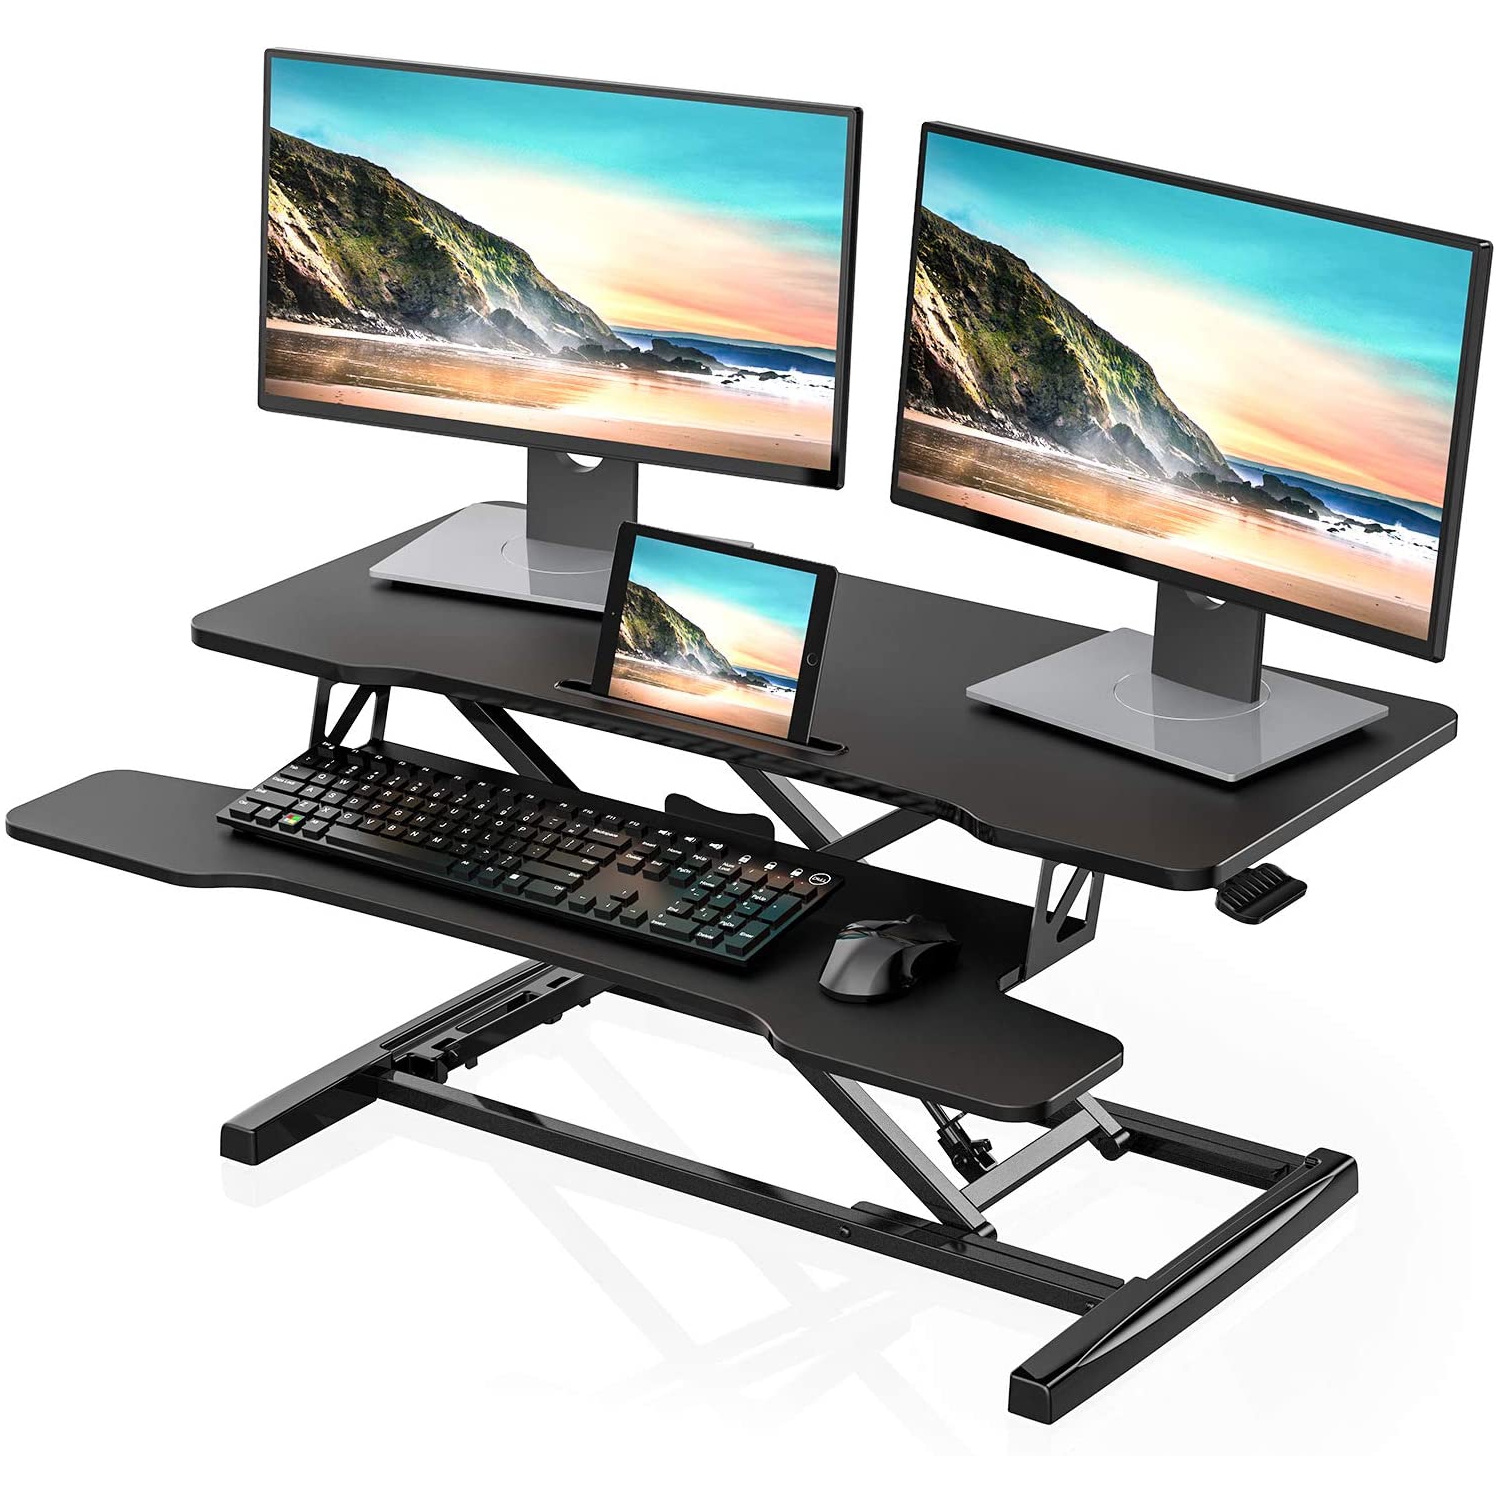 FITUEYES 36'' Standing Desk Converter, Height Adjustable Sit Stand Desk for Dual Monitor and Laptop Riser, Tabletop Workstation with Wide Keyboard Tray, Black